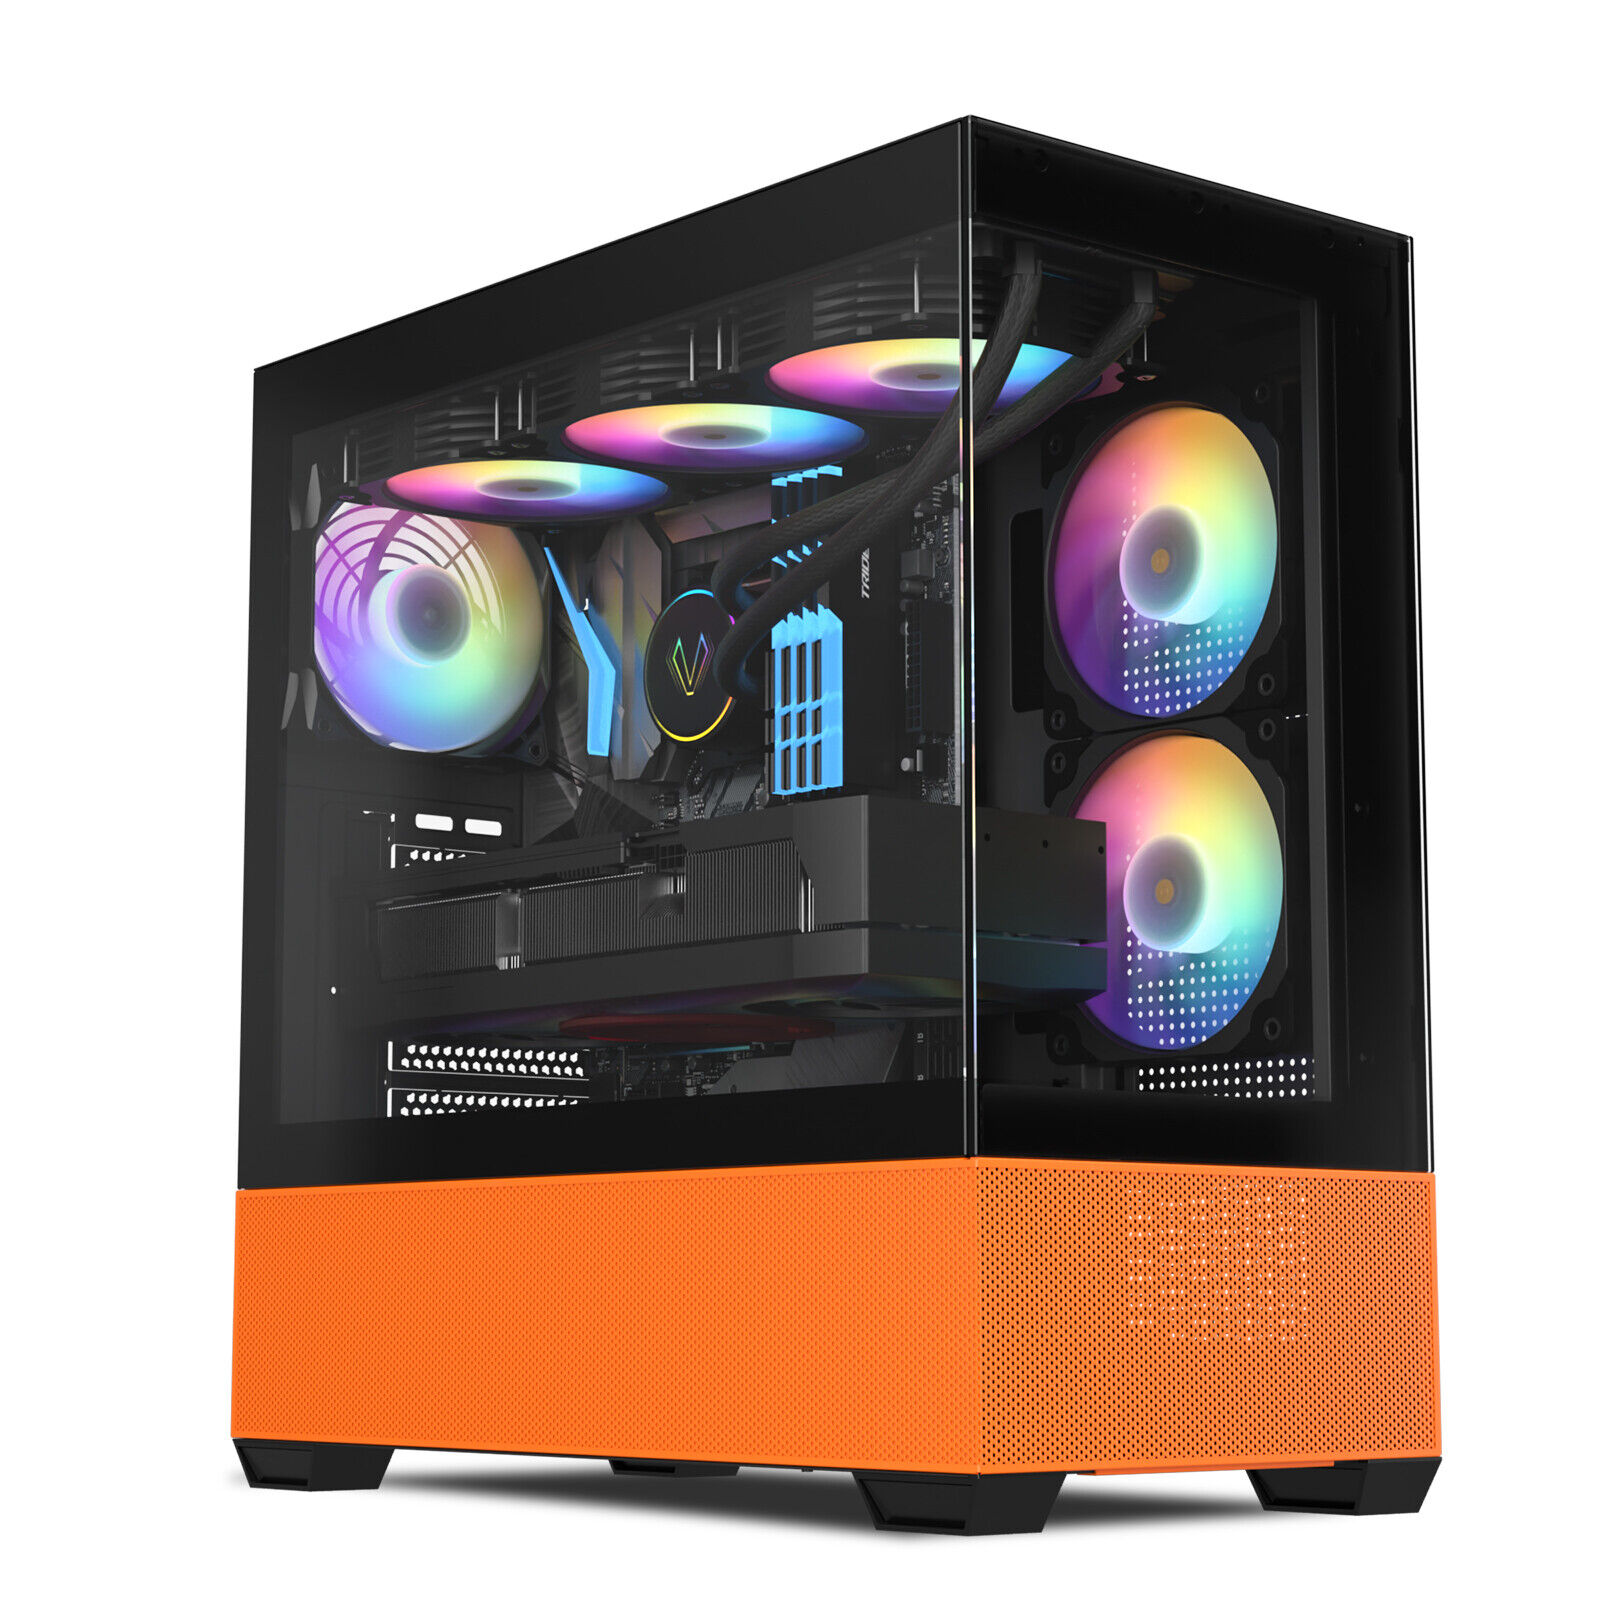 Vetroo K3 Mid-Tower ATX Micro-ATX PC Gaming Case Tempered Glass w/120mm ARGB Fan